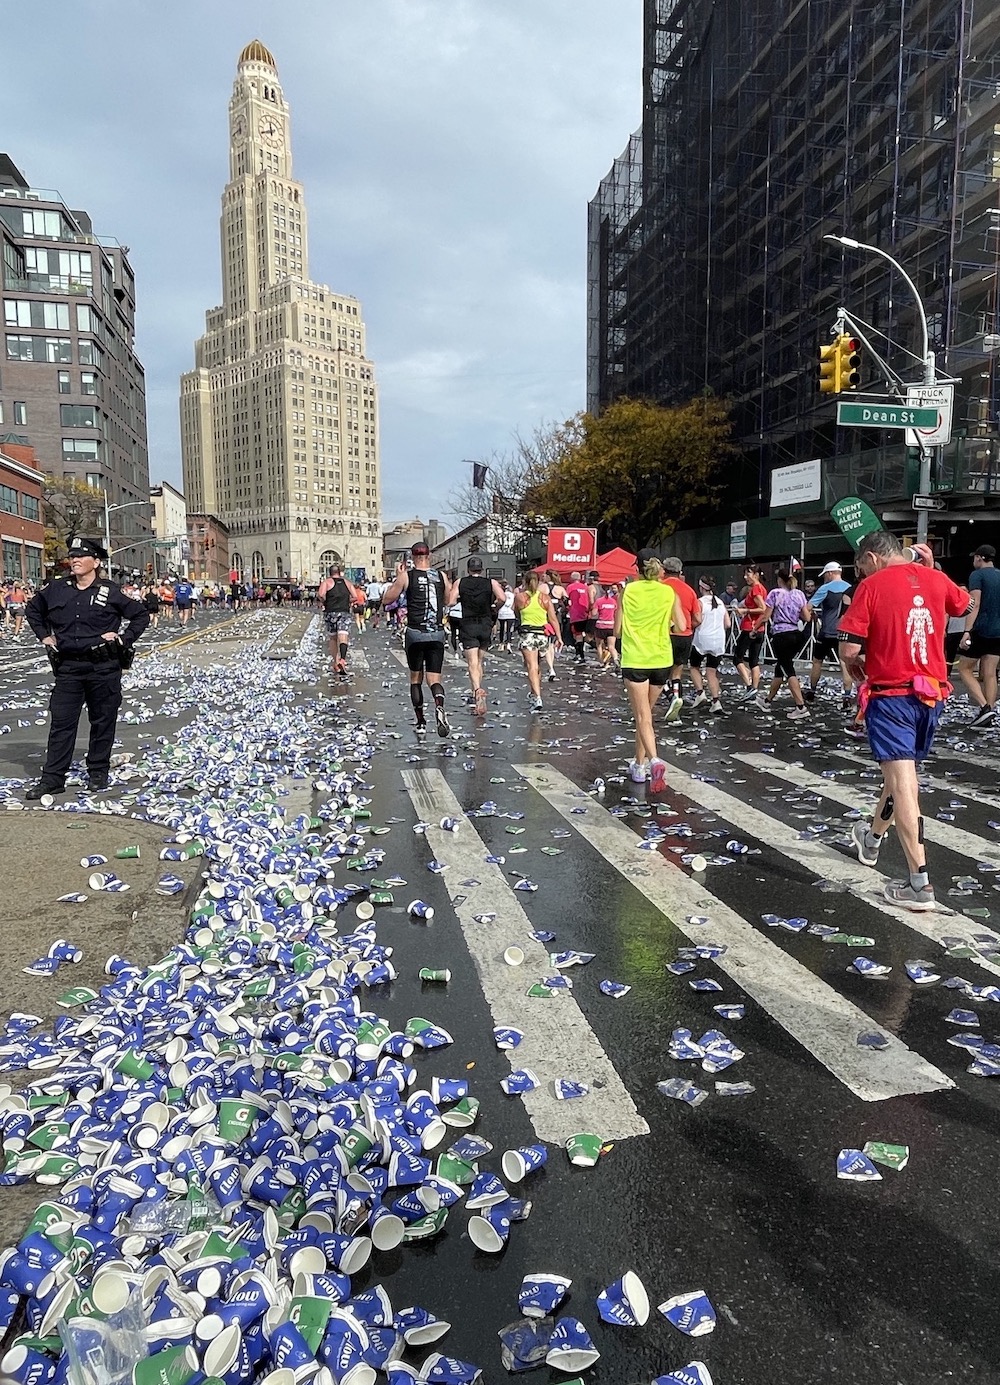 Discarded paper cups cover part of a street as marathon runners pass by.